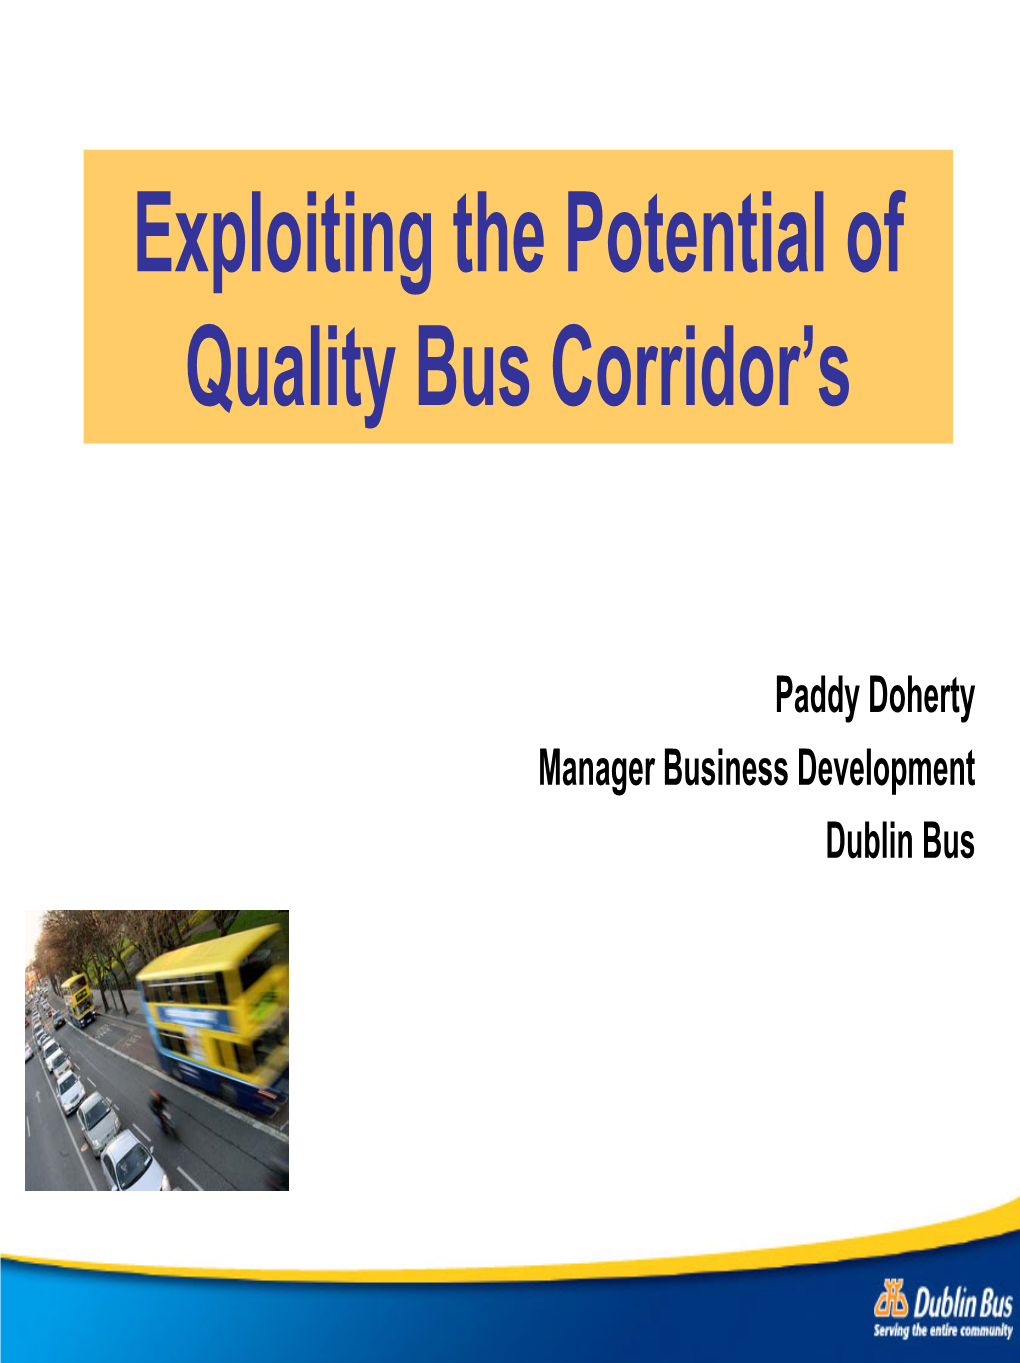 Exploiting the Potential of Quality Bus Corridor's